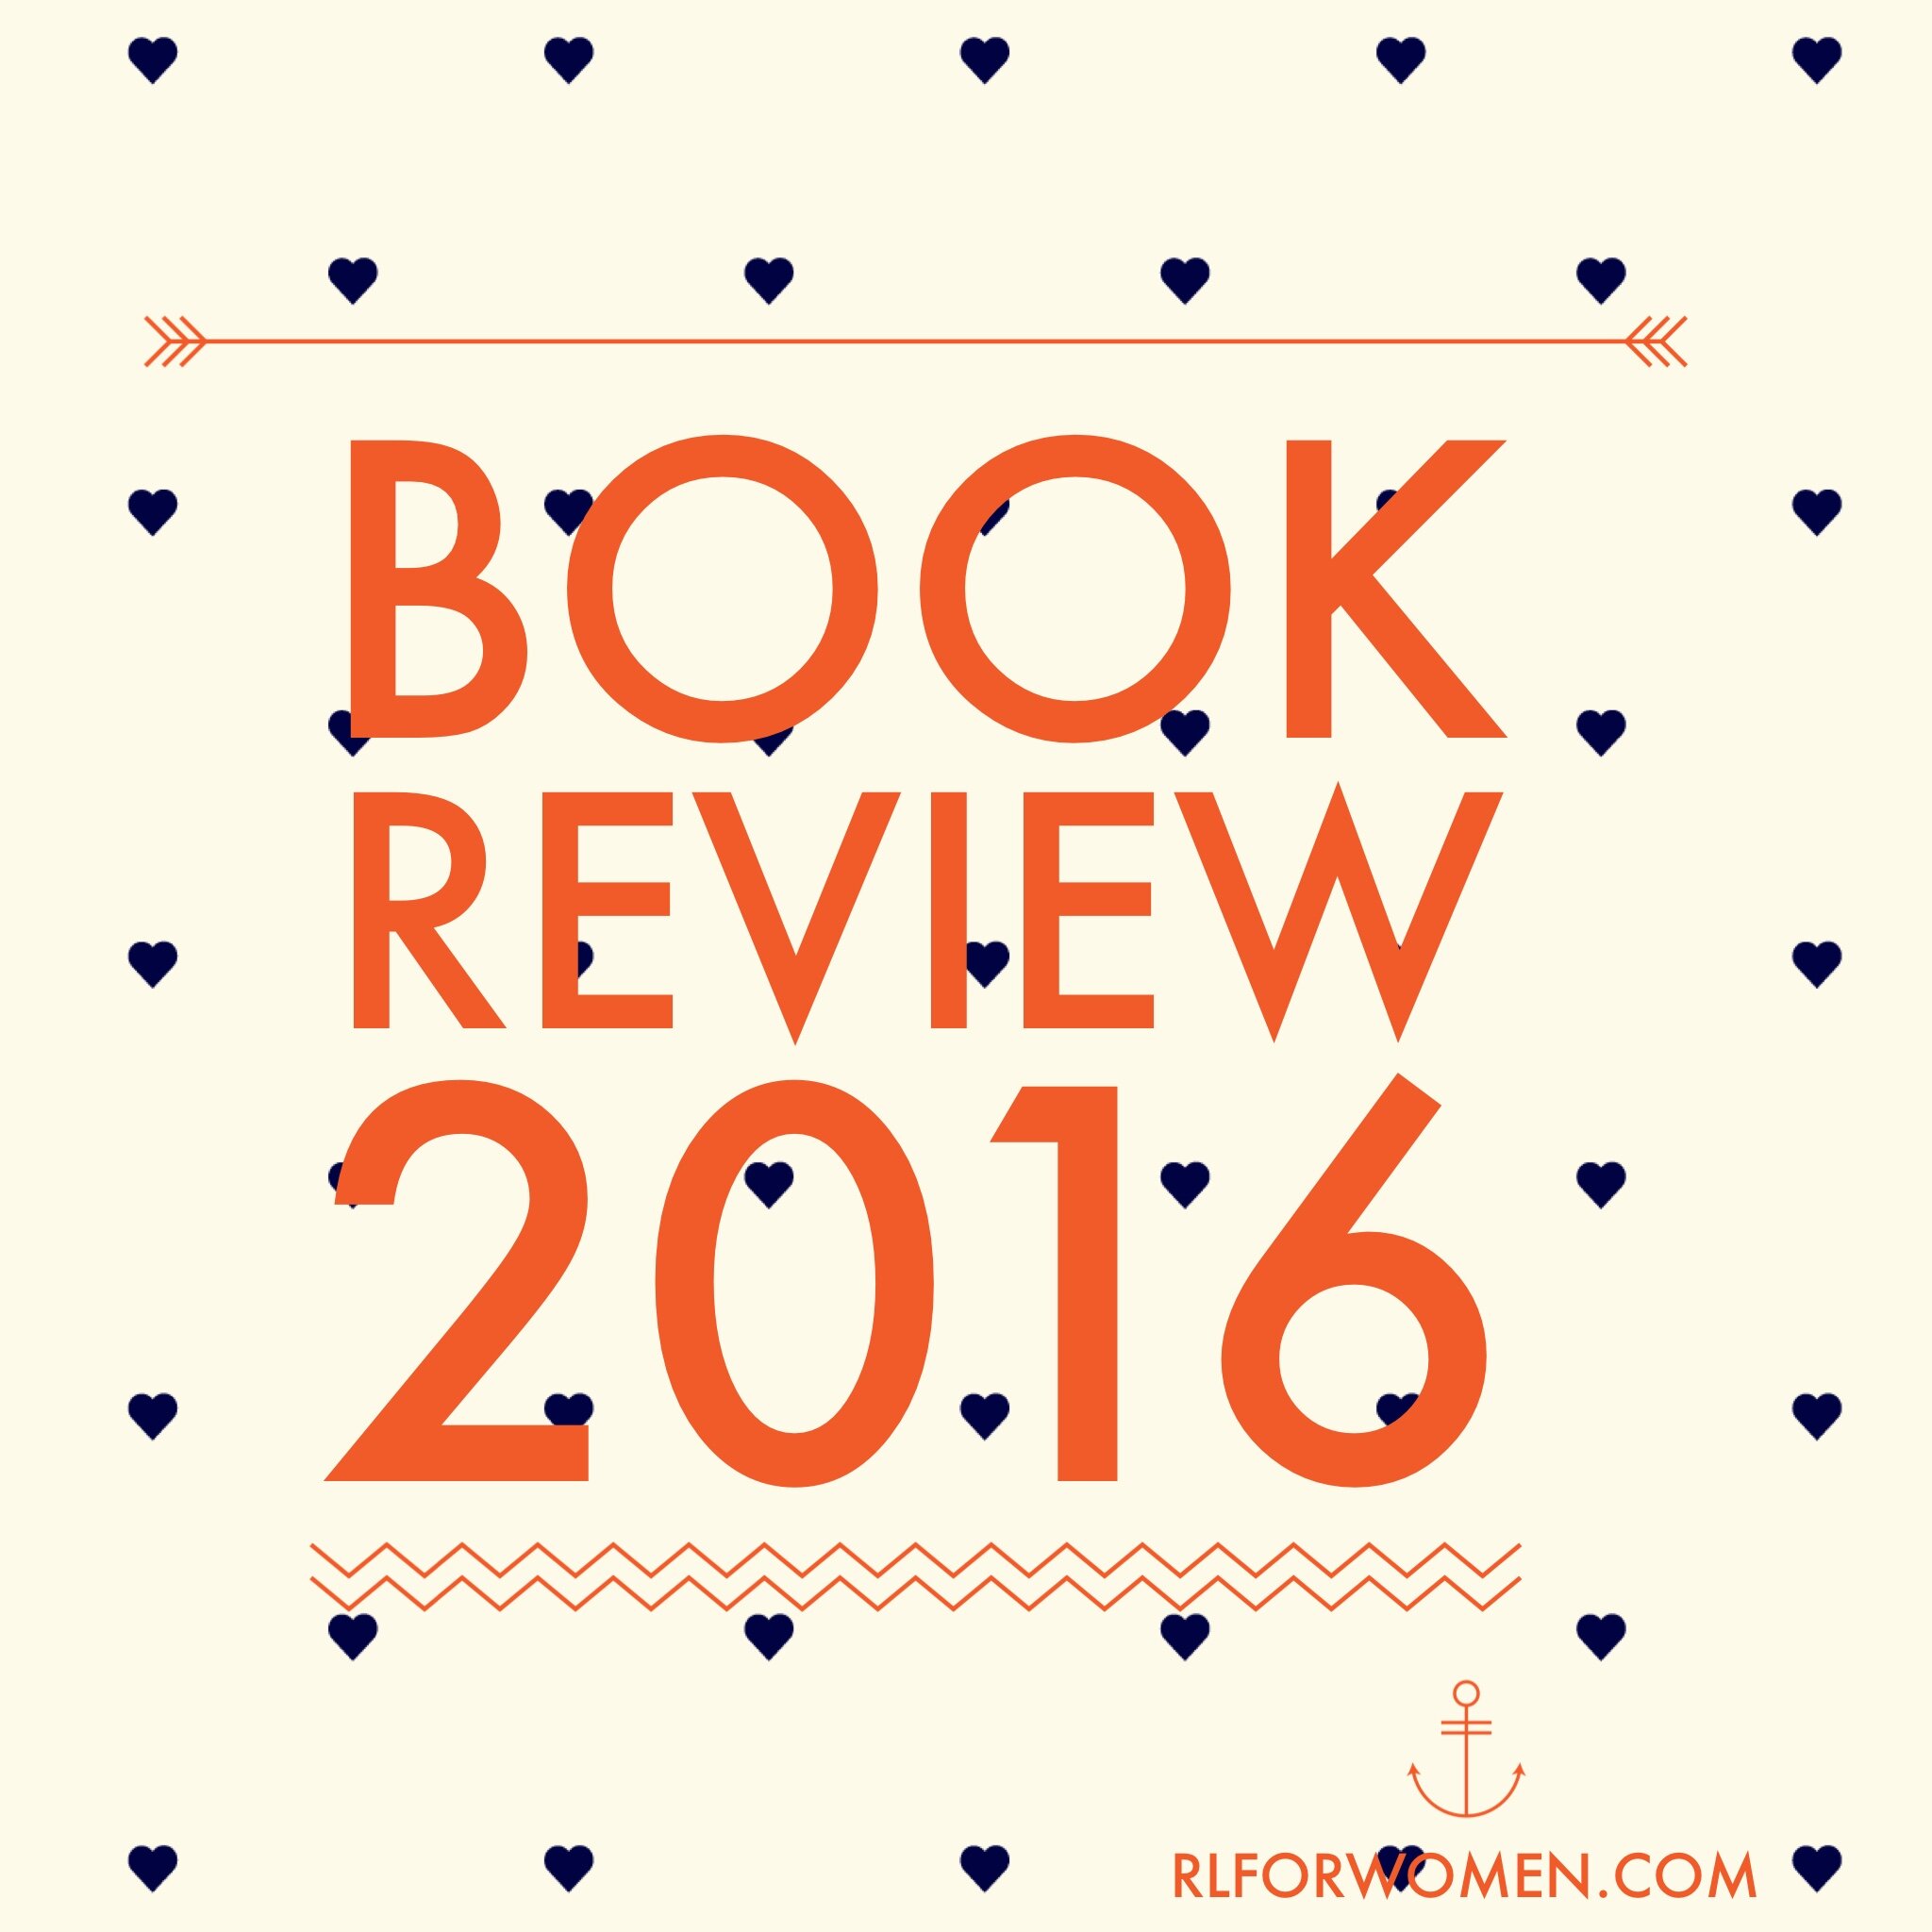 bookreview2016